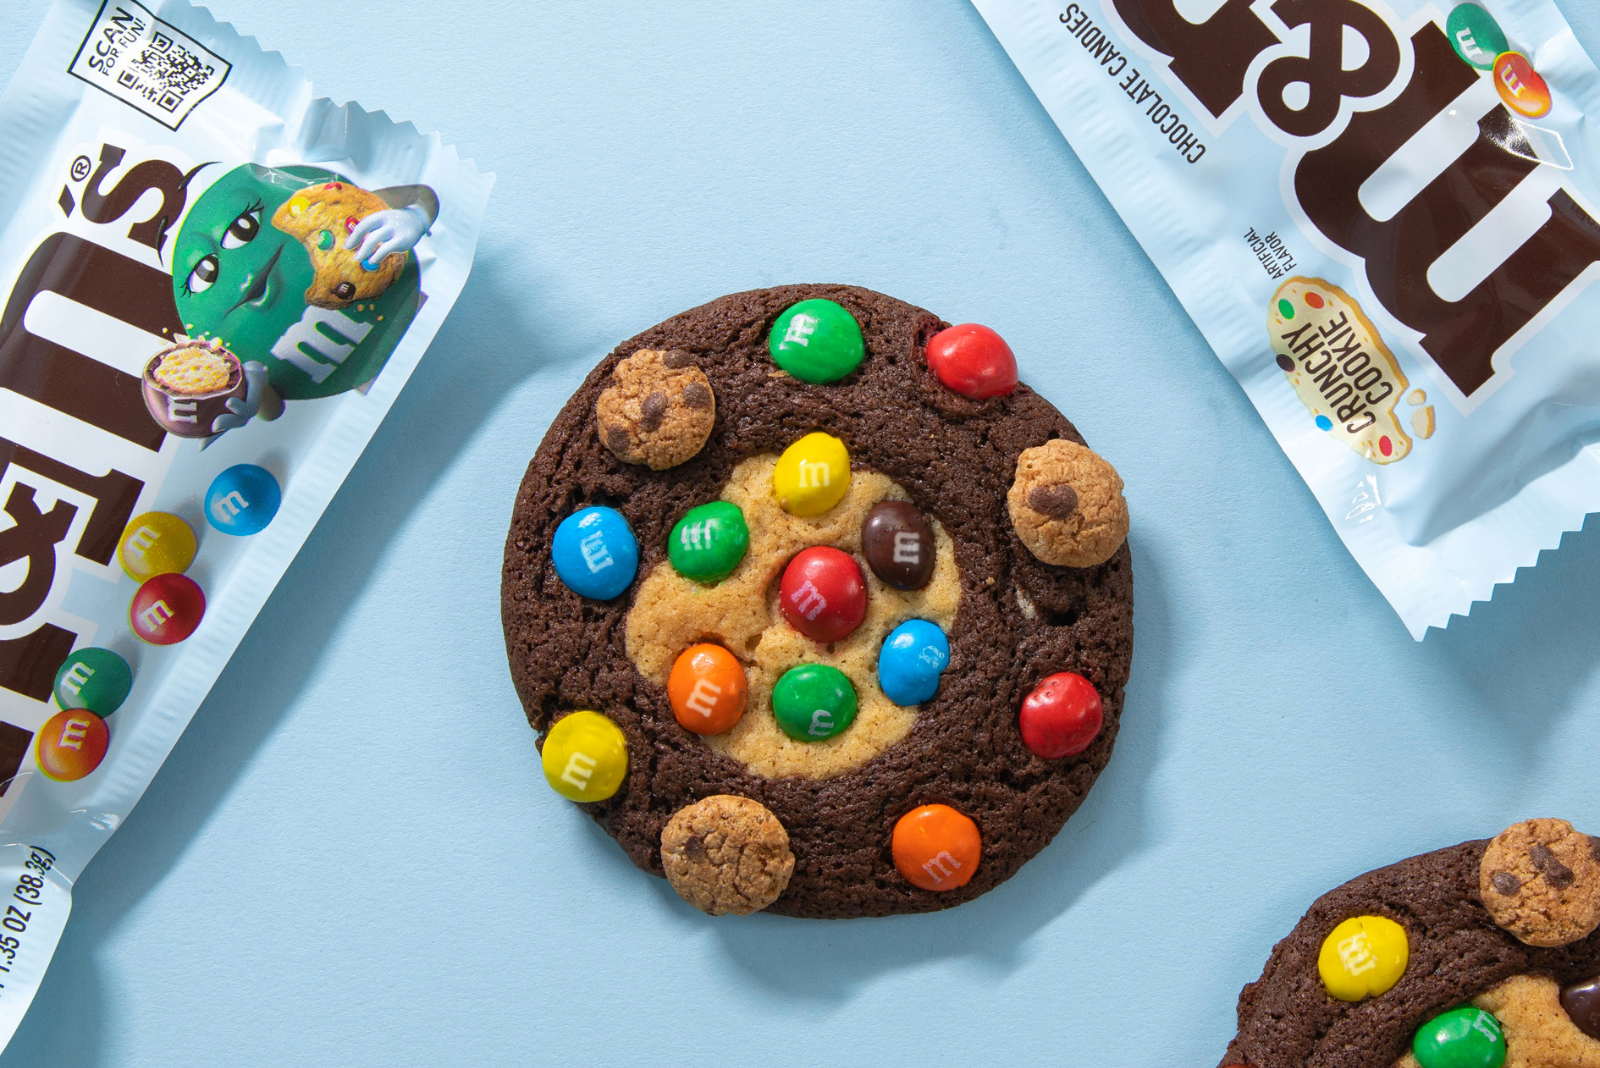 Mars teams up with Milk Bar's Christina Tosi for limited M&M'S cookie drop  - Commercial Baking